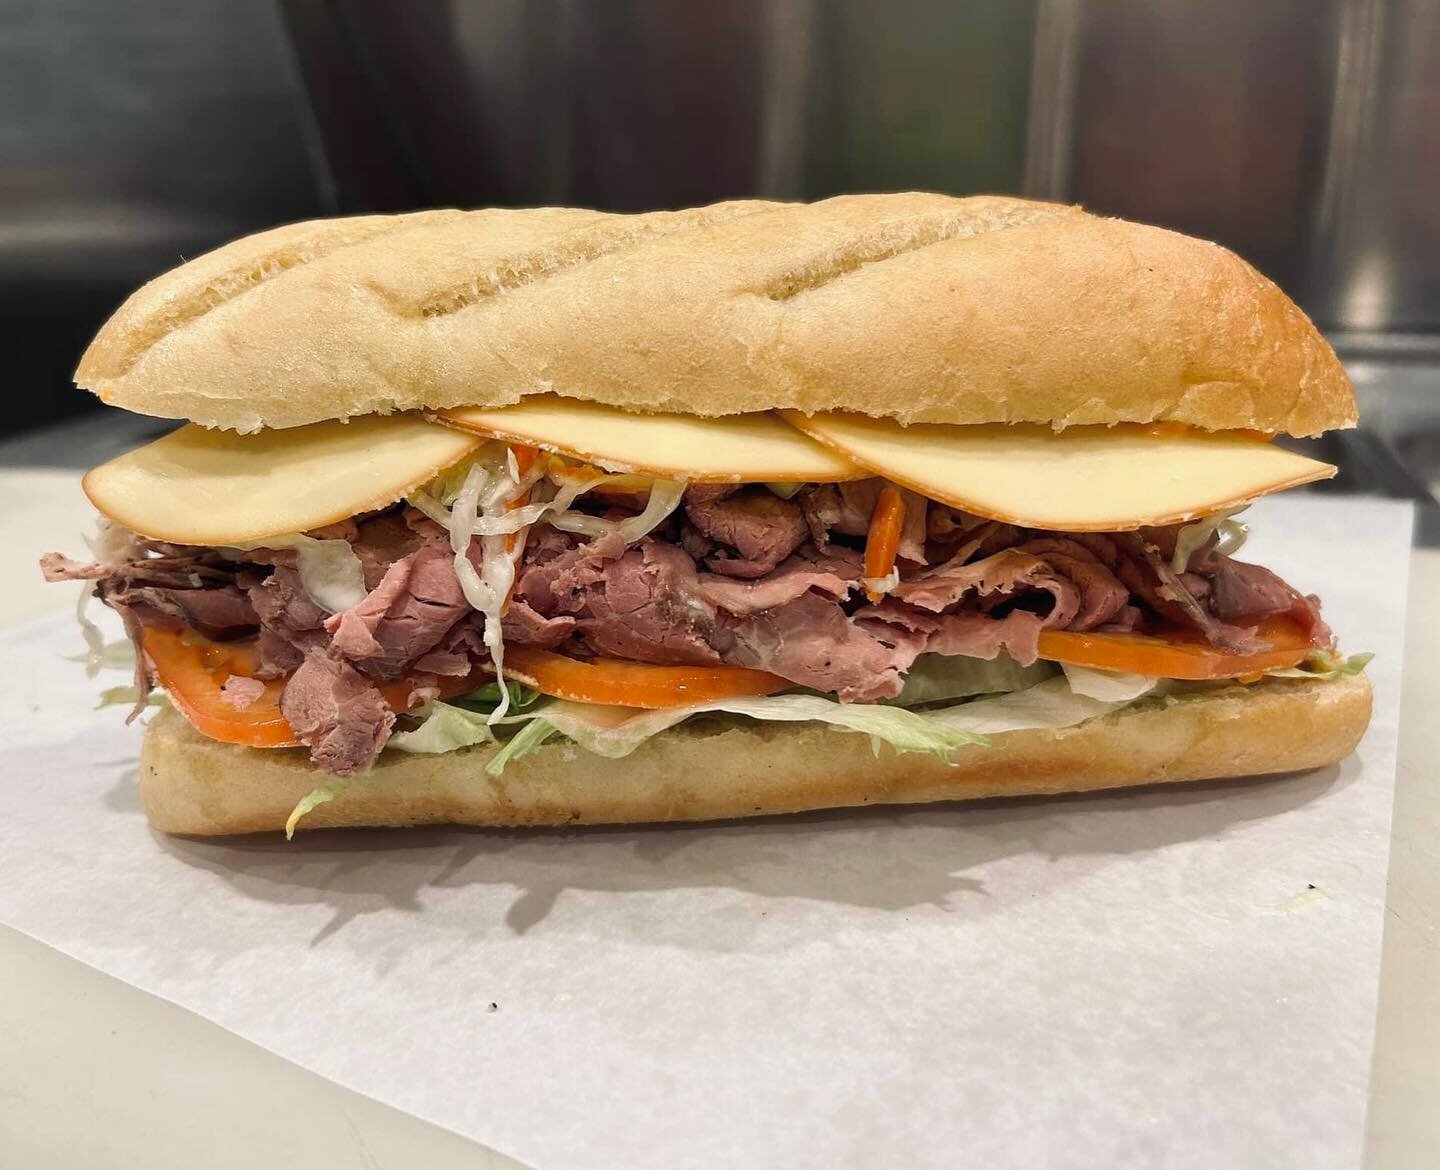 🥪 Introducing the &quot;MASTADON&quot; Sandwich! 

🥩 Roast Beef
🥓 Bacon
🧀 Smoked Gouda
🥗 Coleslaw
🥬 Lettuce
🍅 Tomato
🍯 Russian Dressing

Tag your friends who need to try this epic creation ASAP! #MASTADONSandwich #shoplocal #FlavorExplosion ?